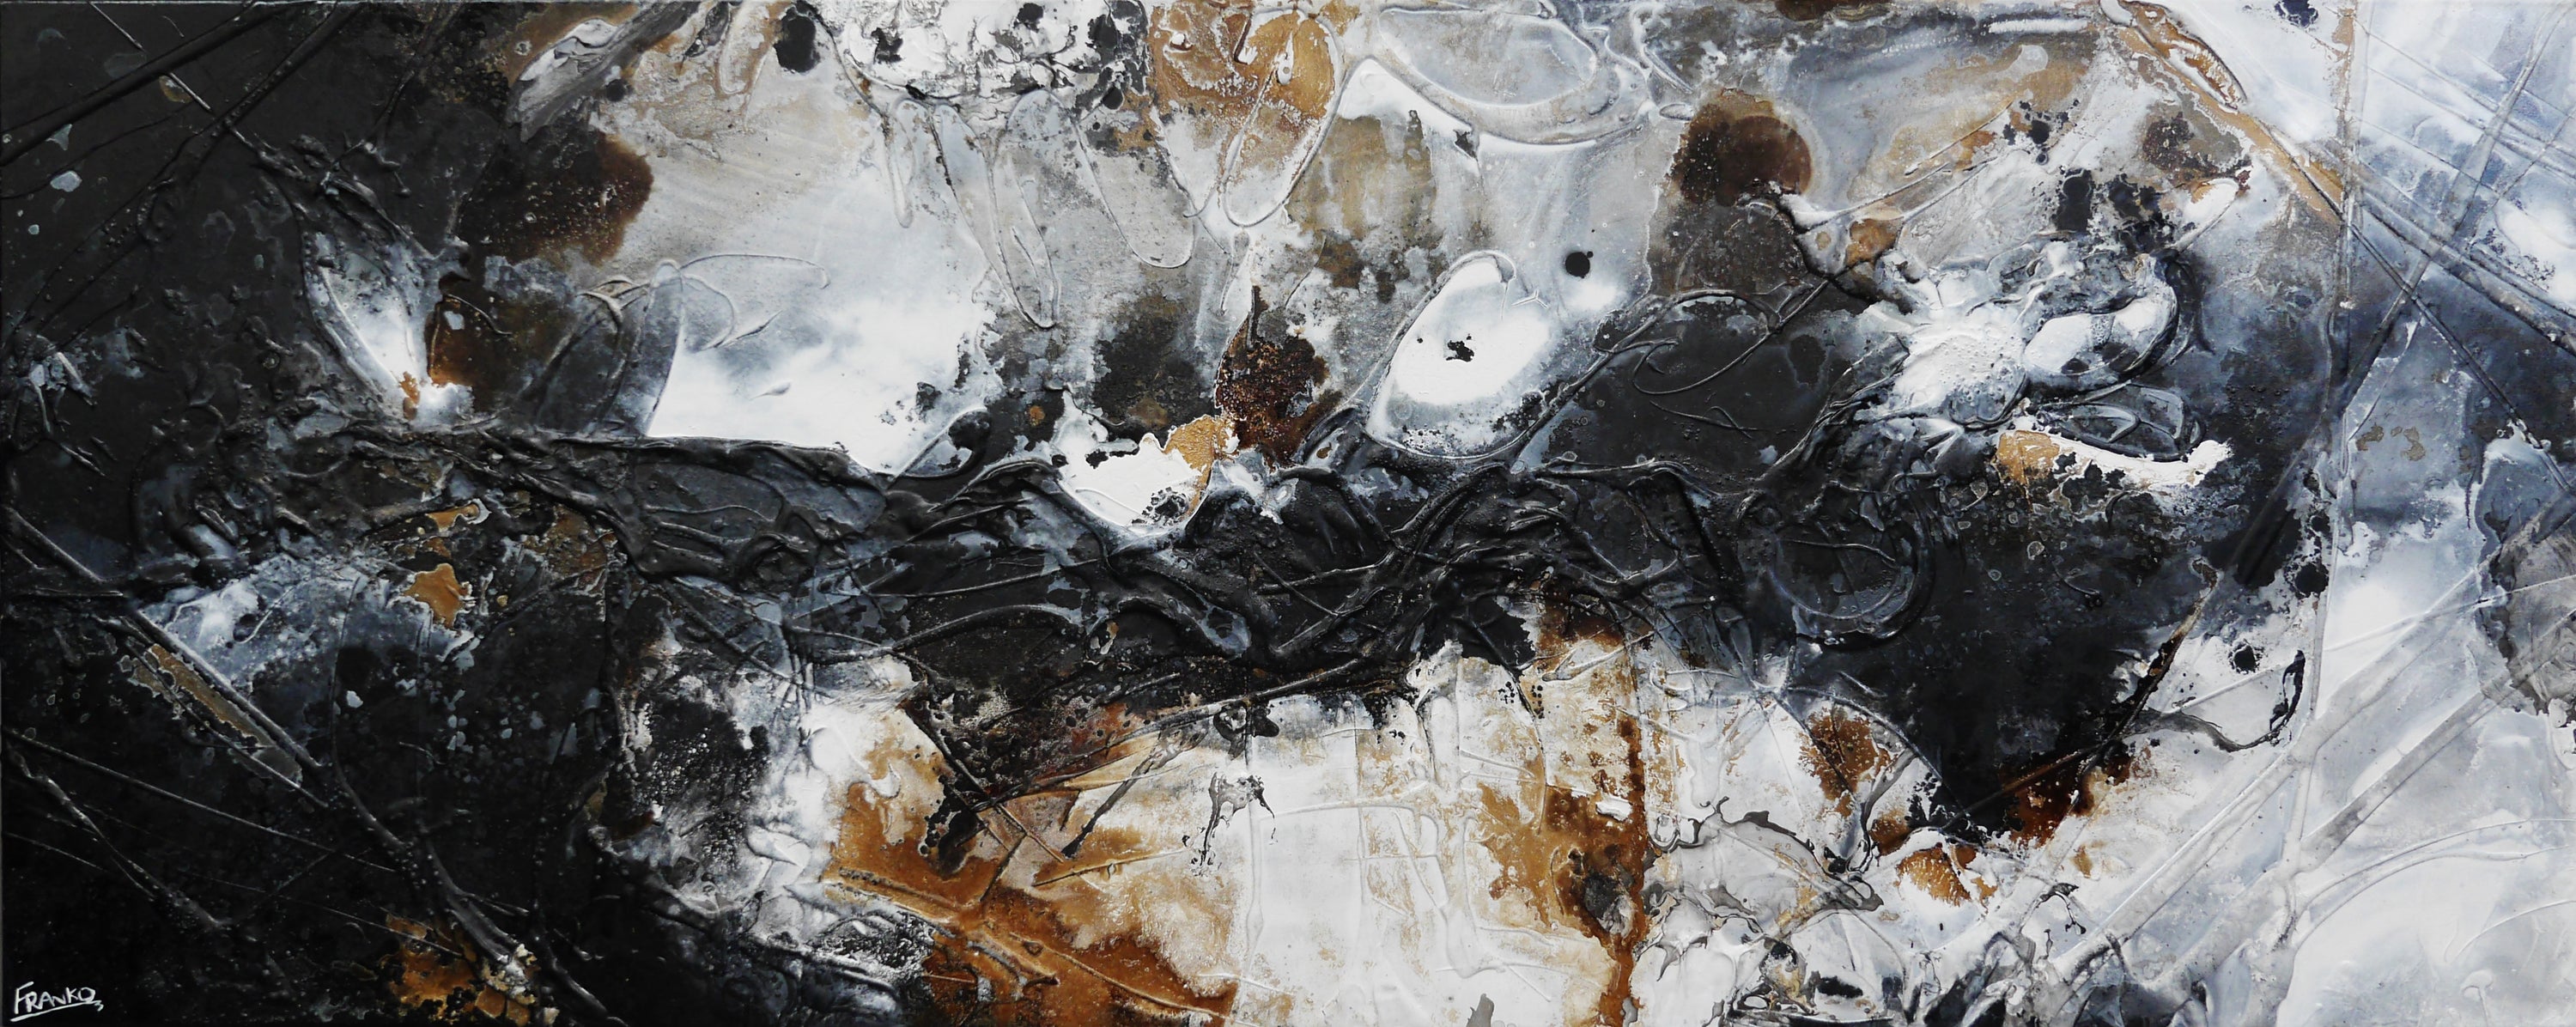 Charcoal and Ice 200cm x 80cm Textured Abstract Painting (SOLD)